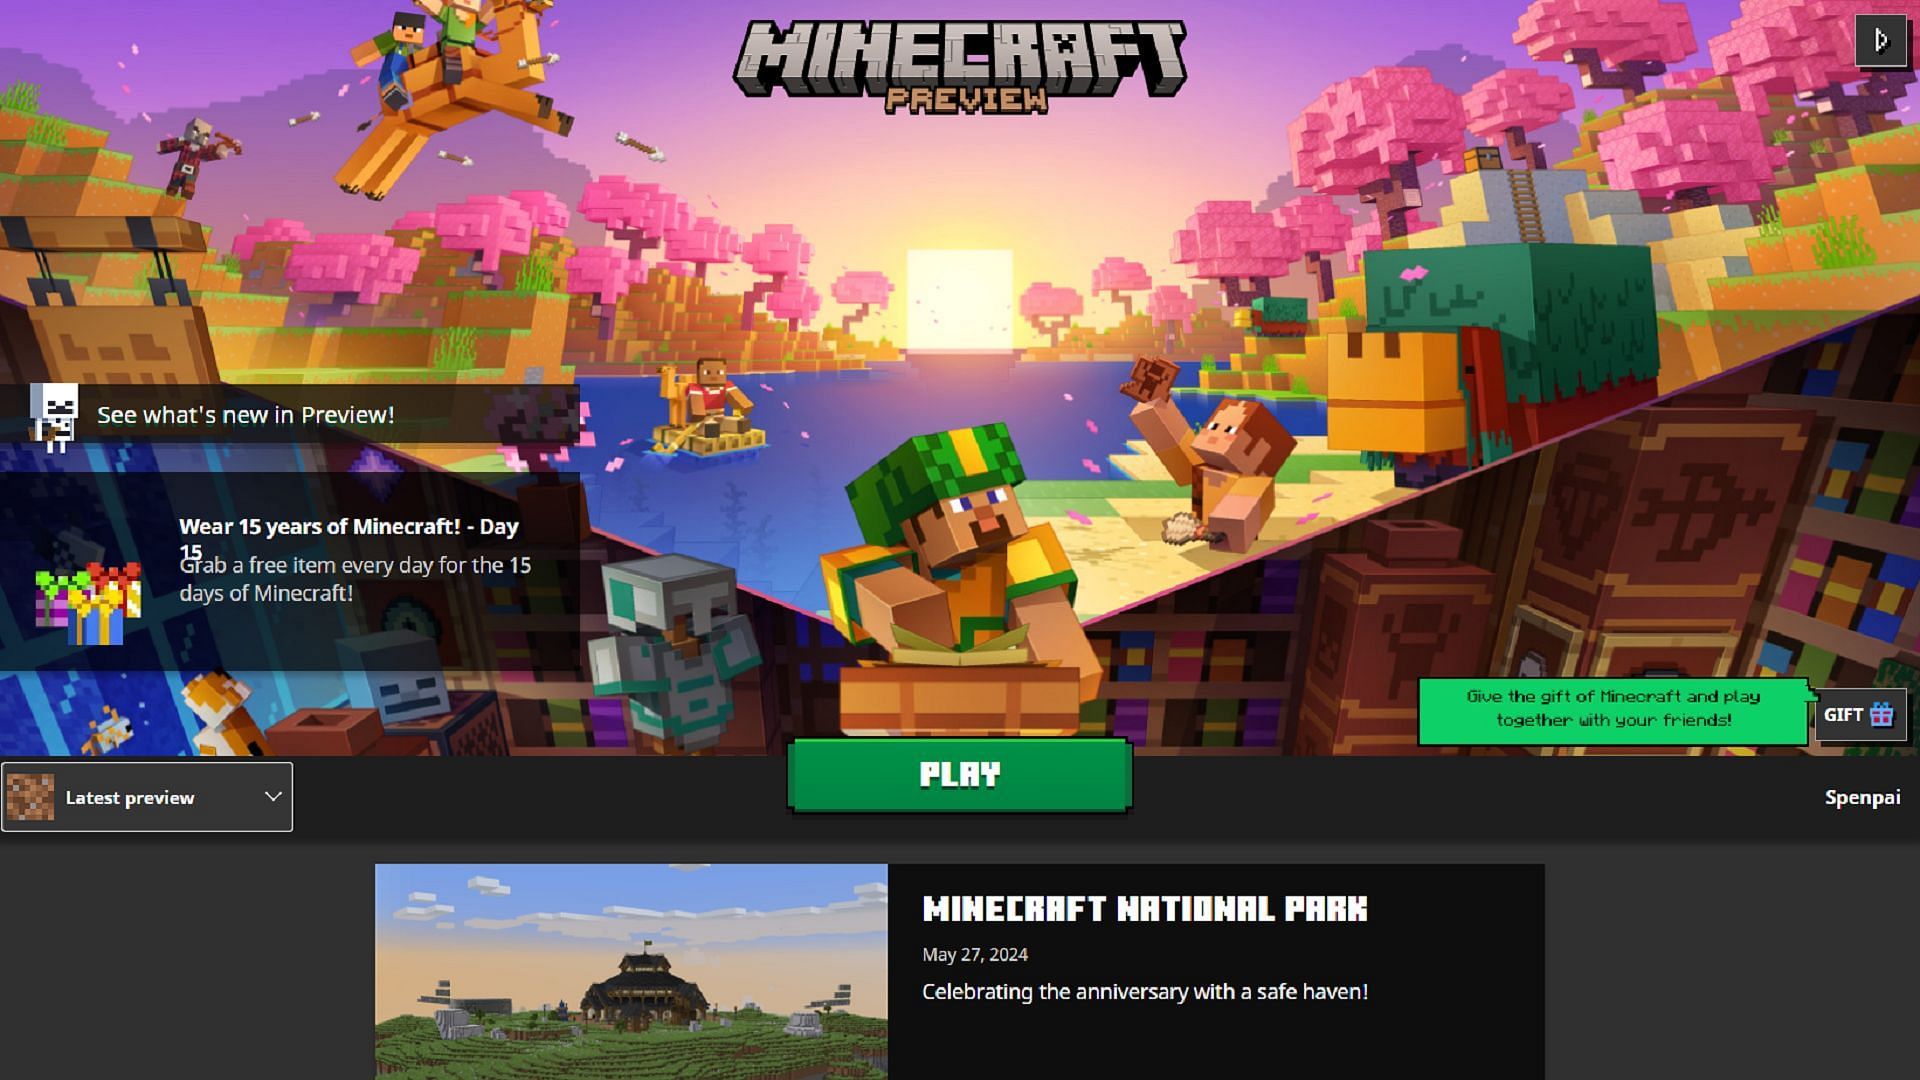 Downloading Minecraft Previews on Windows can be easily accomplished with the official launcher (Image via Mojang)